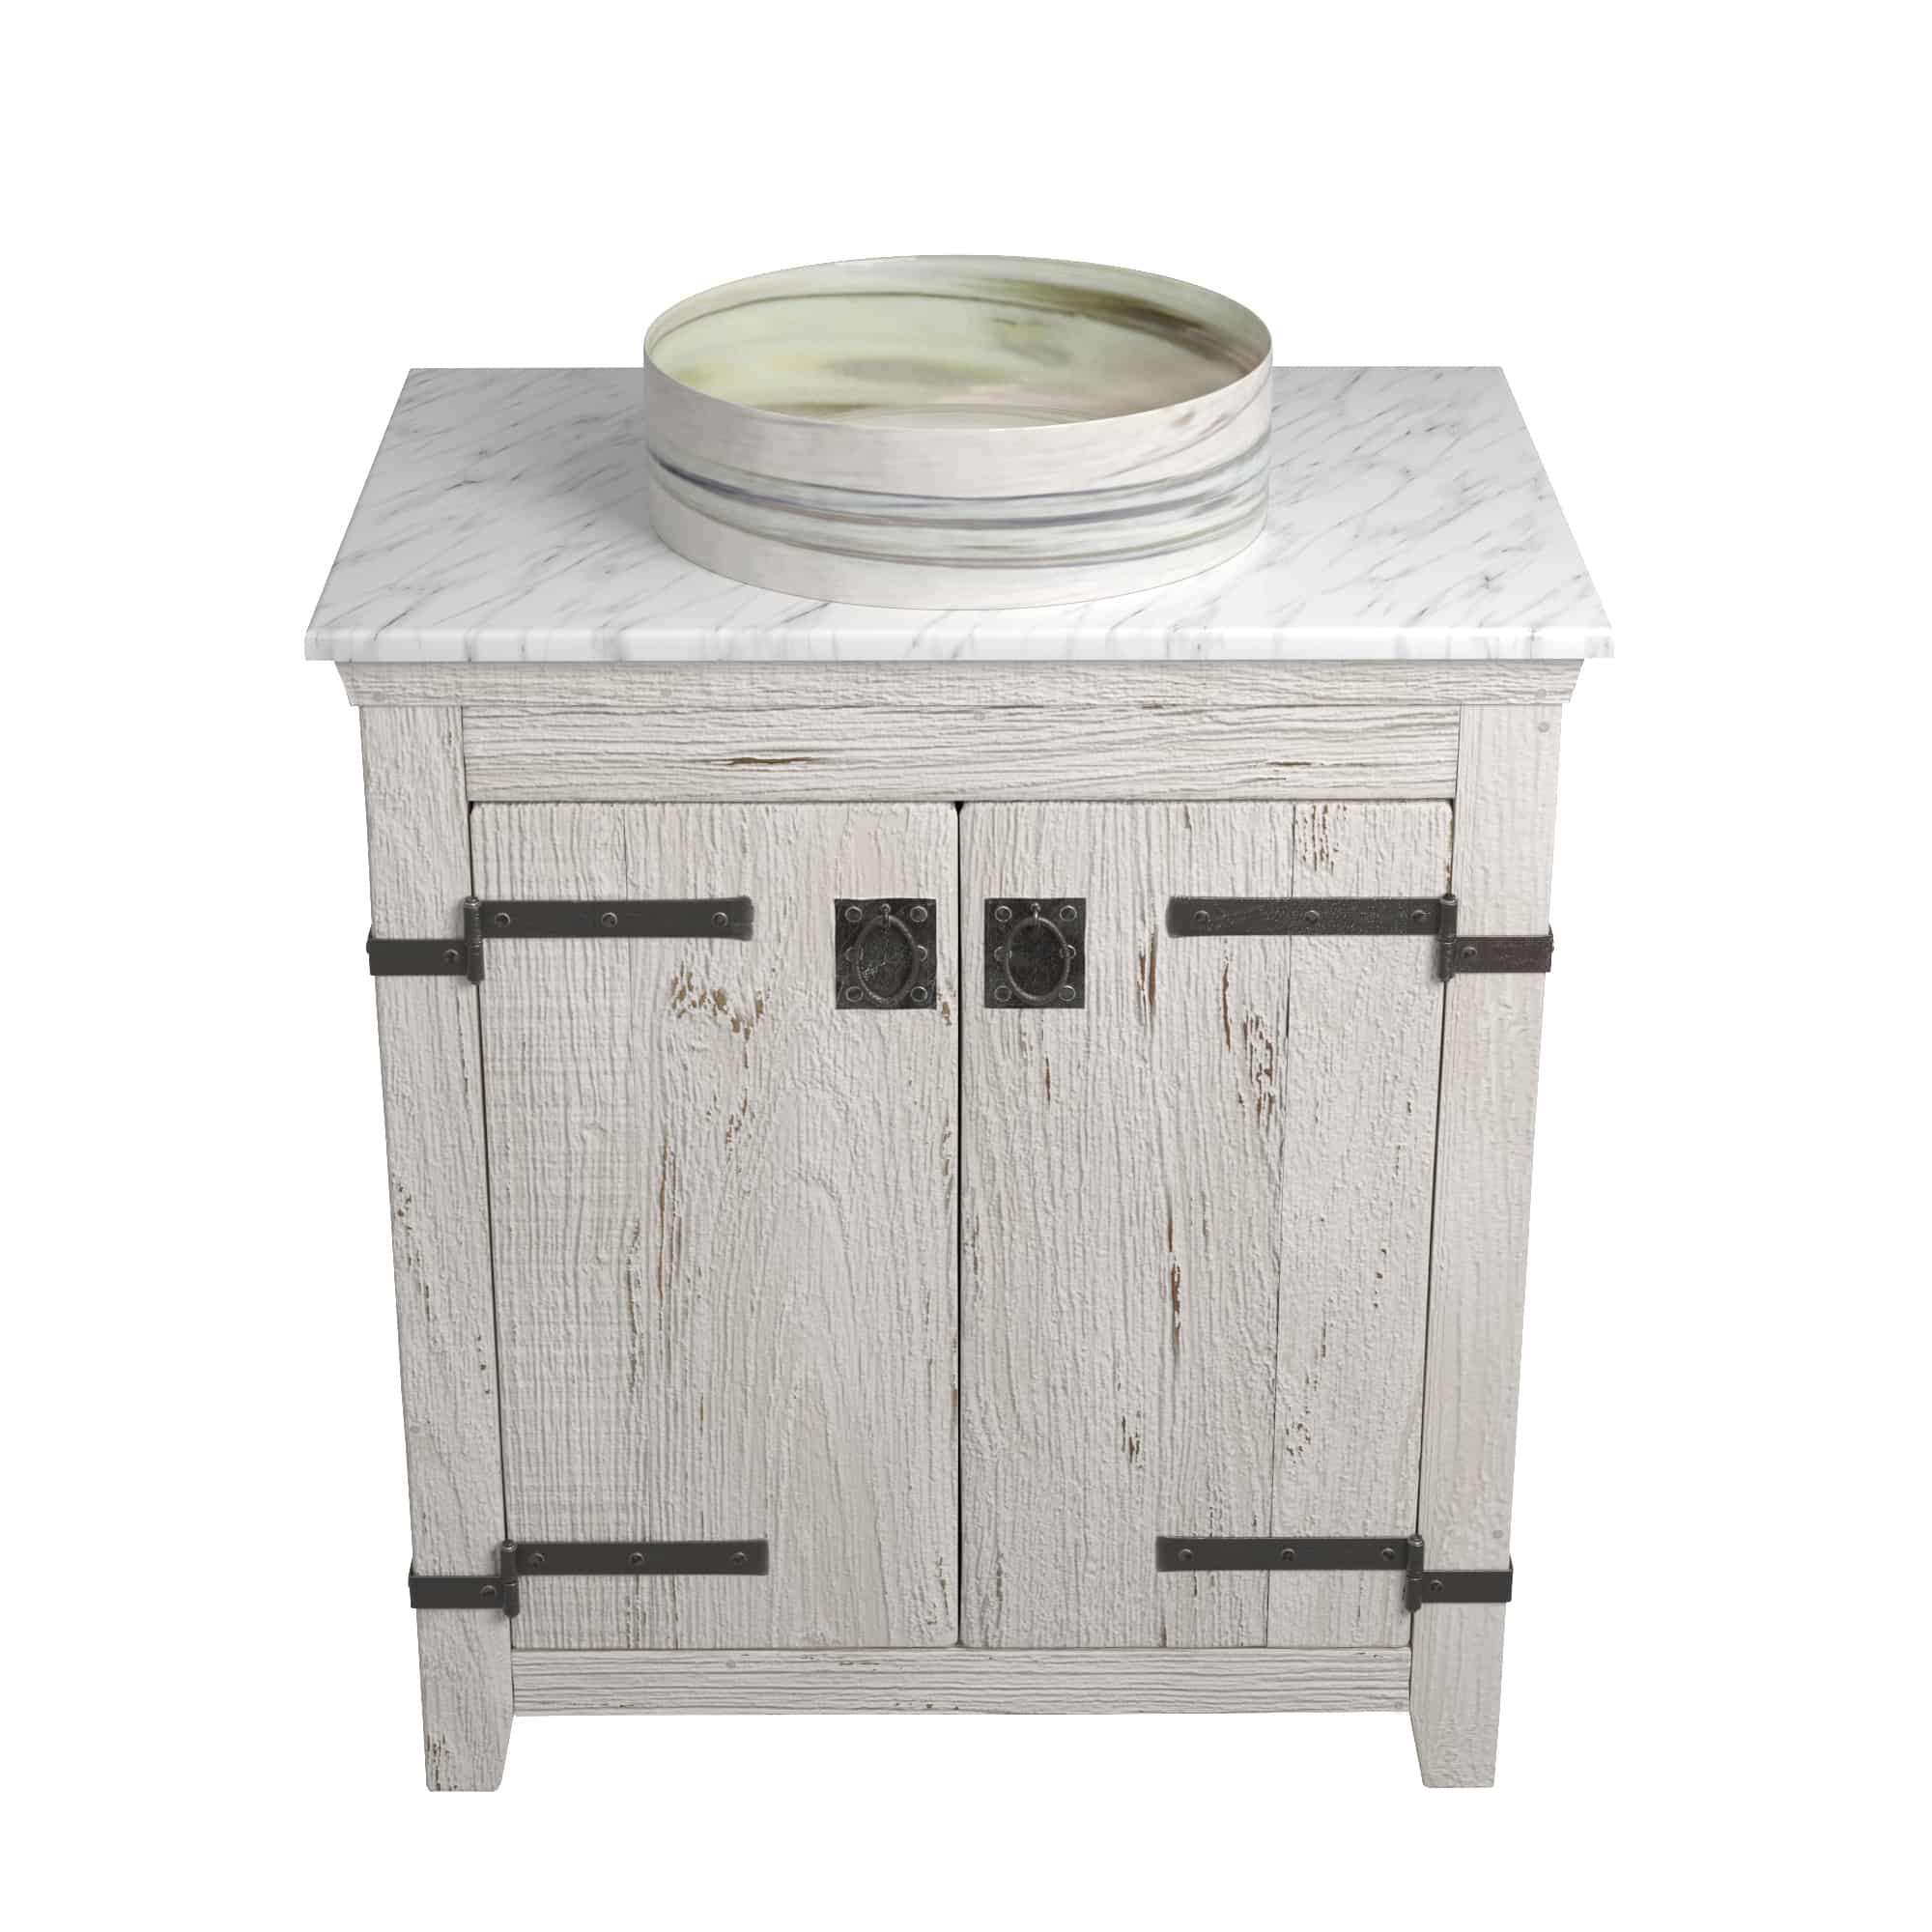 Native Trails 30" Americana Vanity in Whitewash with Carrara Marble Top and Positano in Abalone, No Faucet Hole, BND30-VB-CT-MG-034